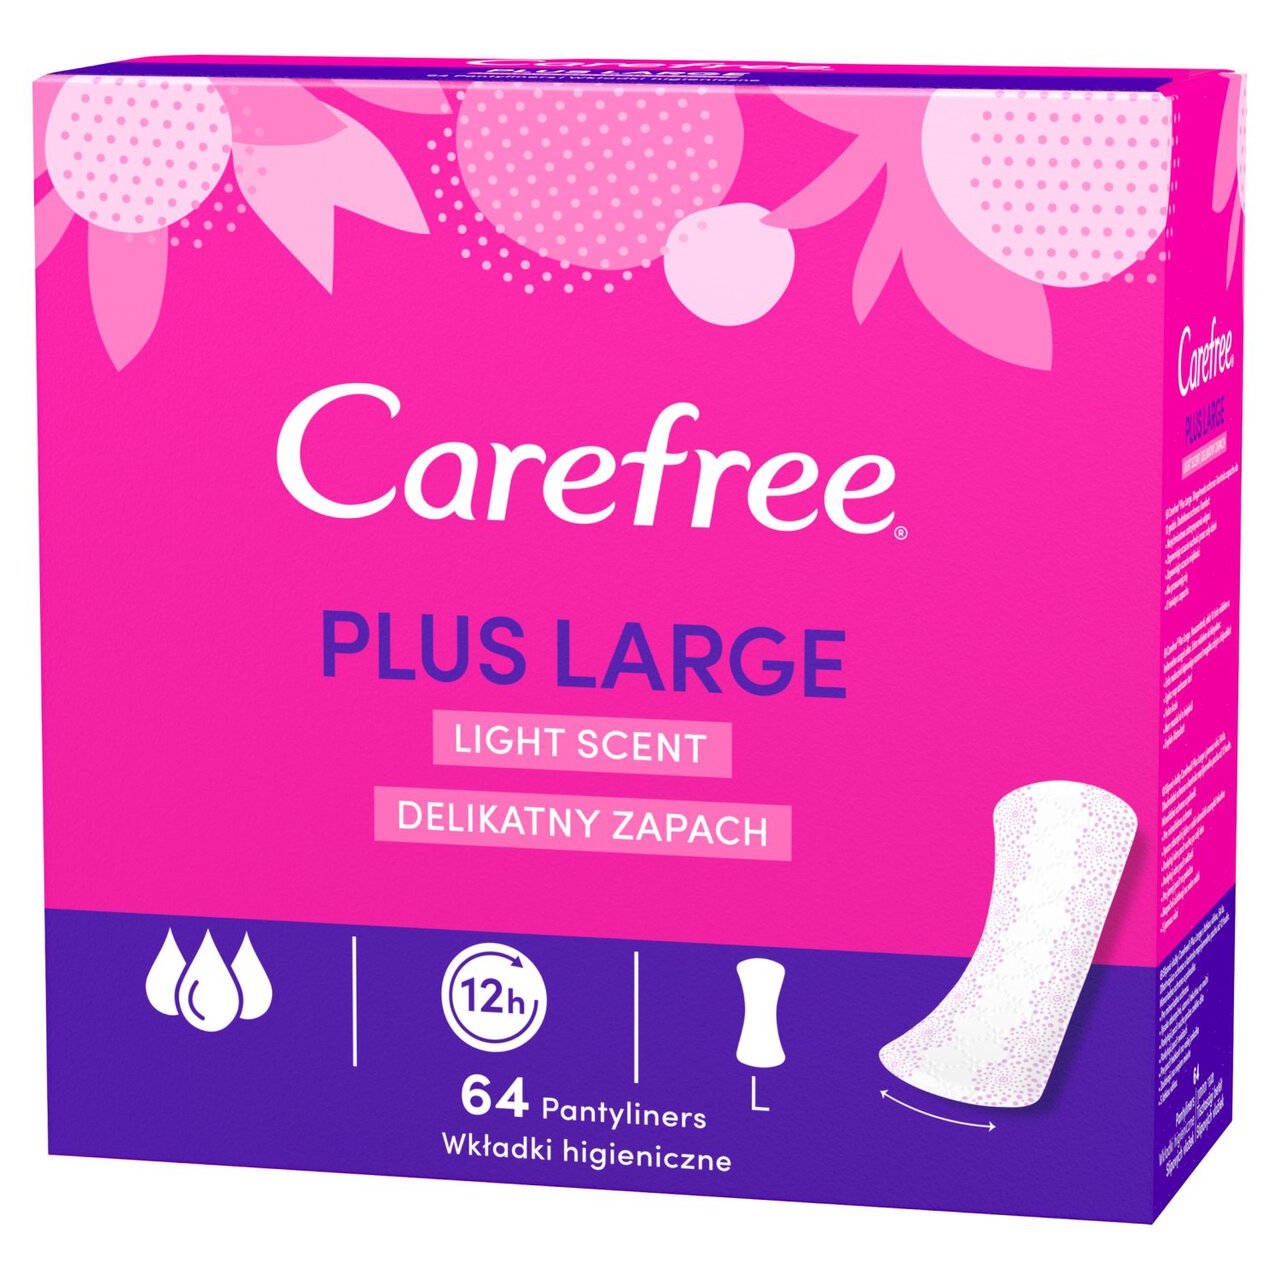 Carefree Plus Large Light Scent Pantyliners 64 per pack